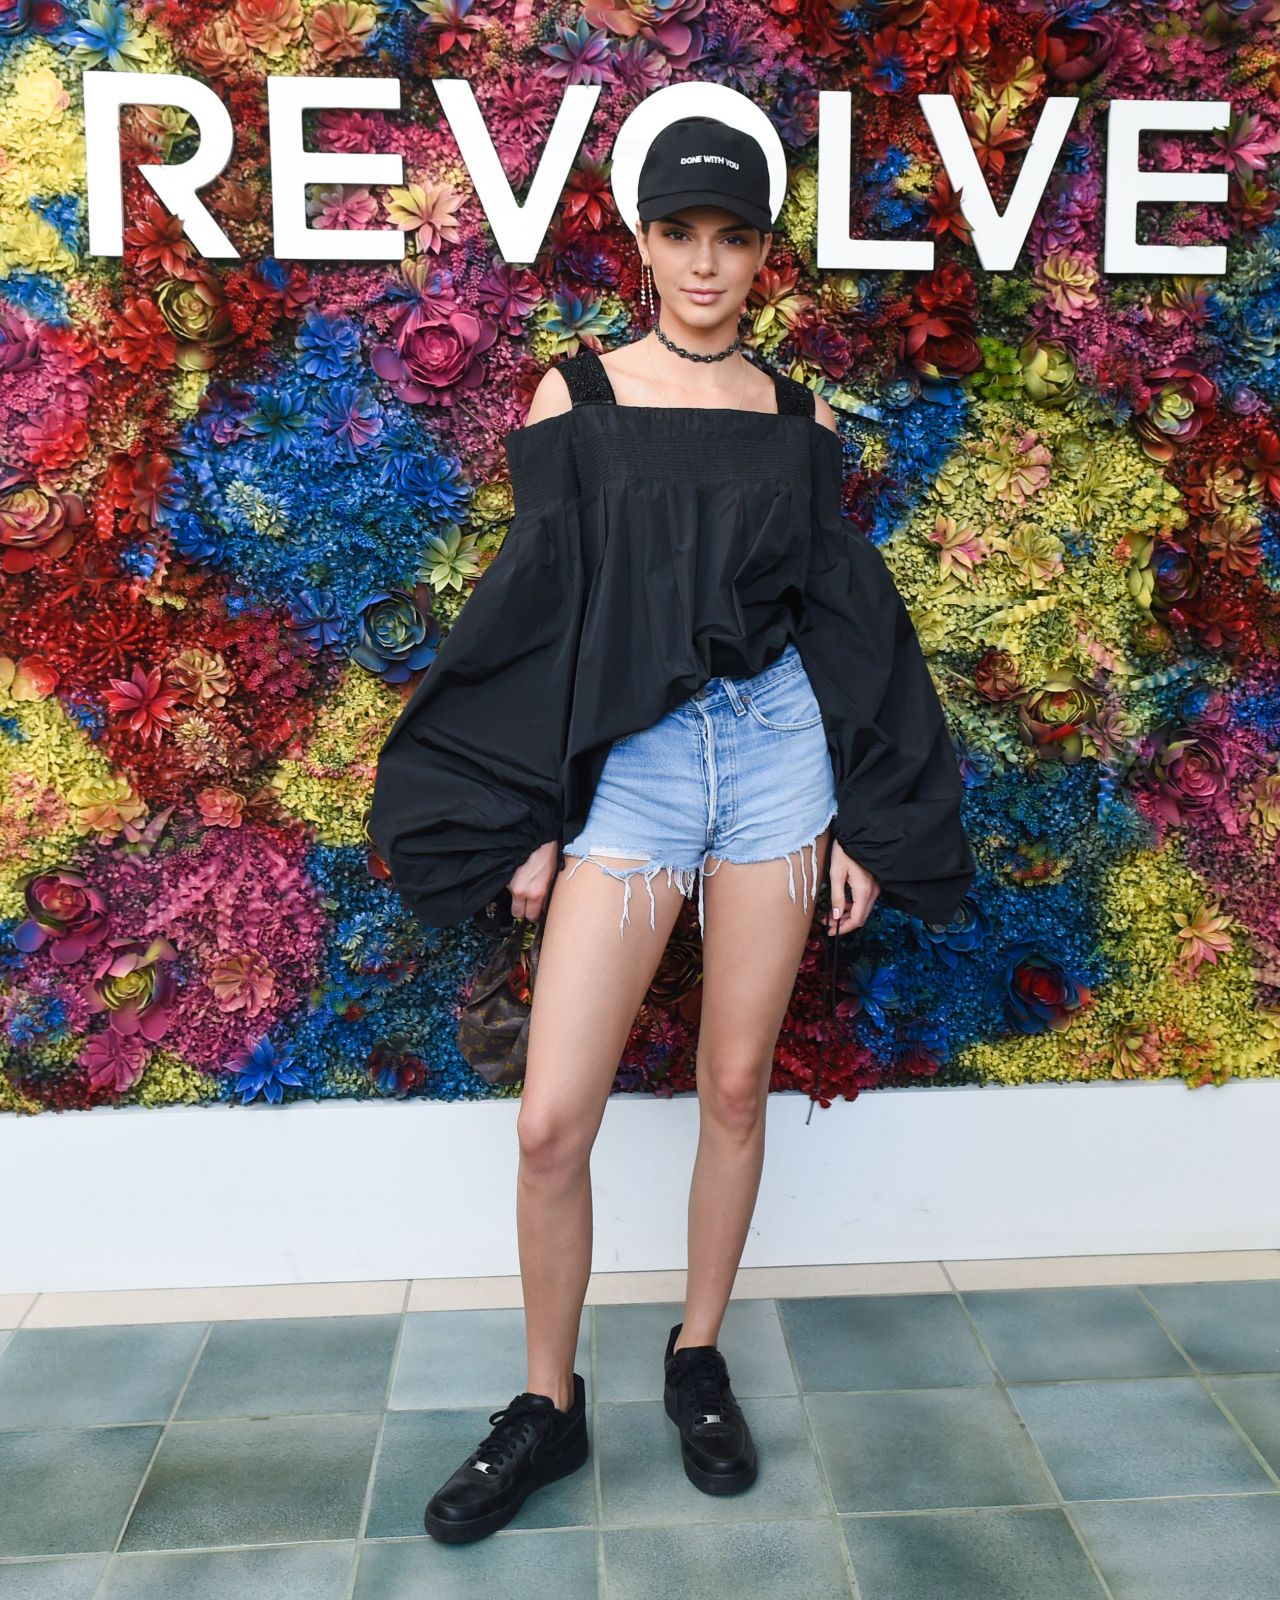 kendall-jenner-revolve-festival-day-2-at-coachella-in-palm-springs-4-16-2017-1